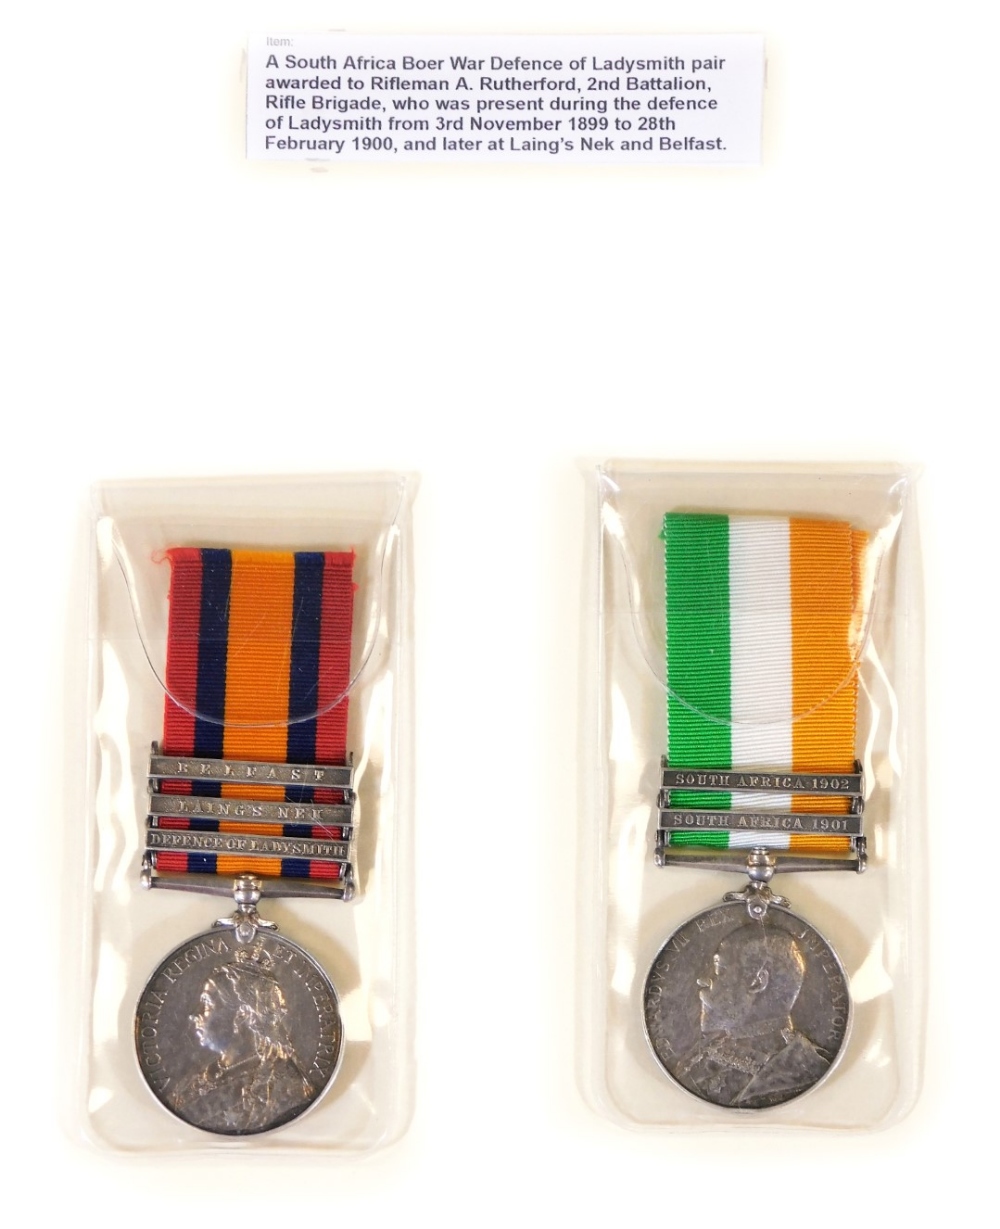 A South African Boer War medal pair, similarly marked A Rutherford, one with Belfast Laing's Nek and